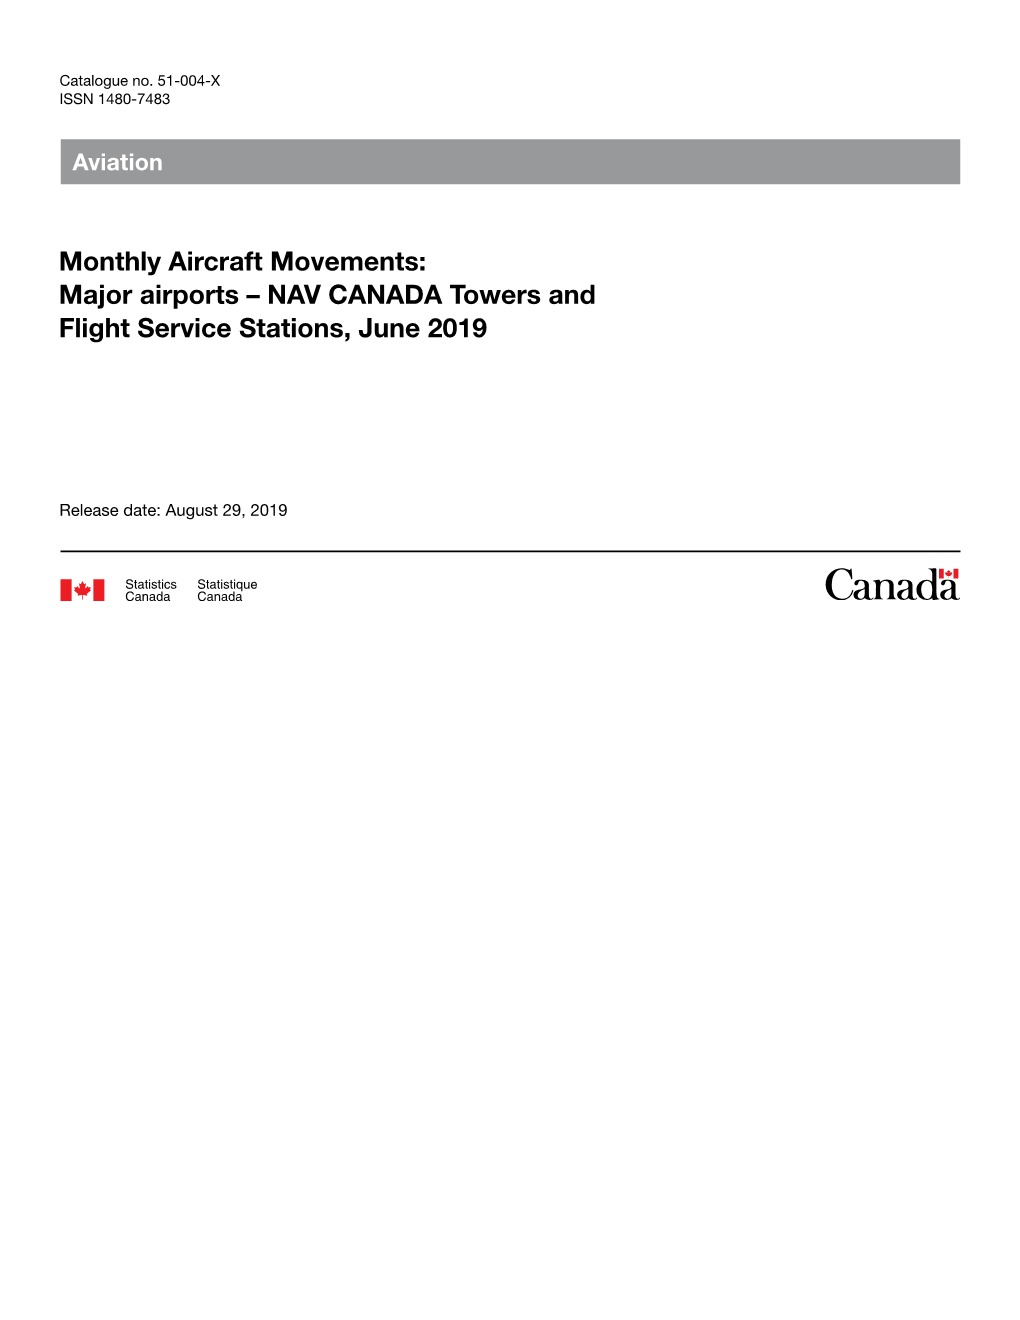 Monthly Aircraft Movements: Major Airports – NAV CANADA Towers and Flight Service Stations, June 2019